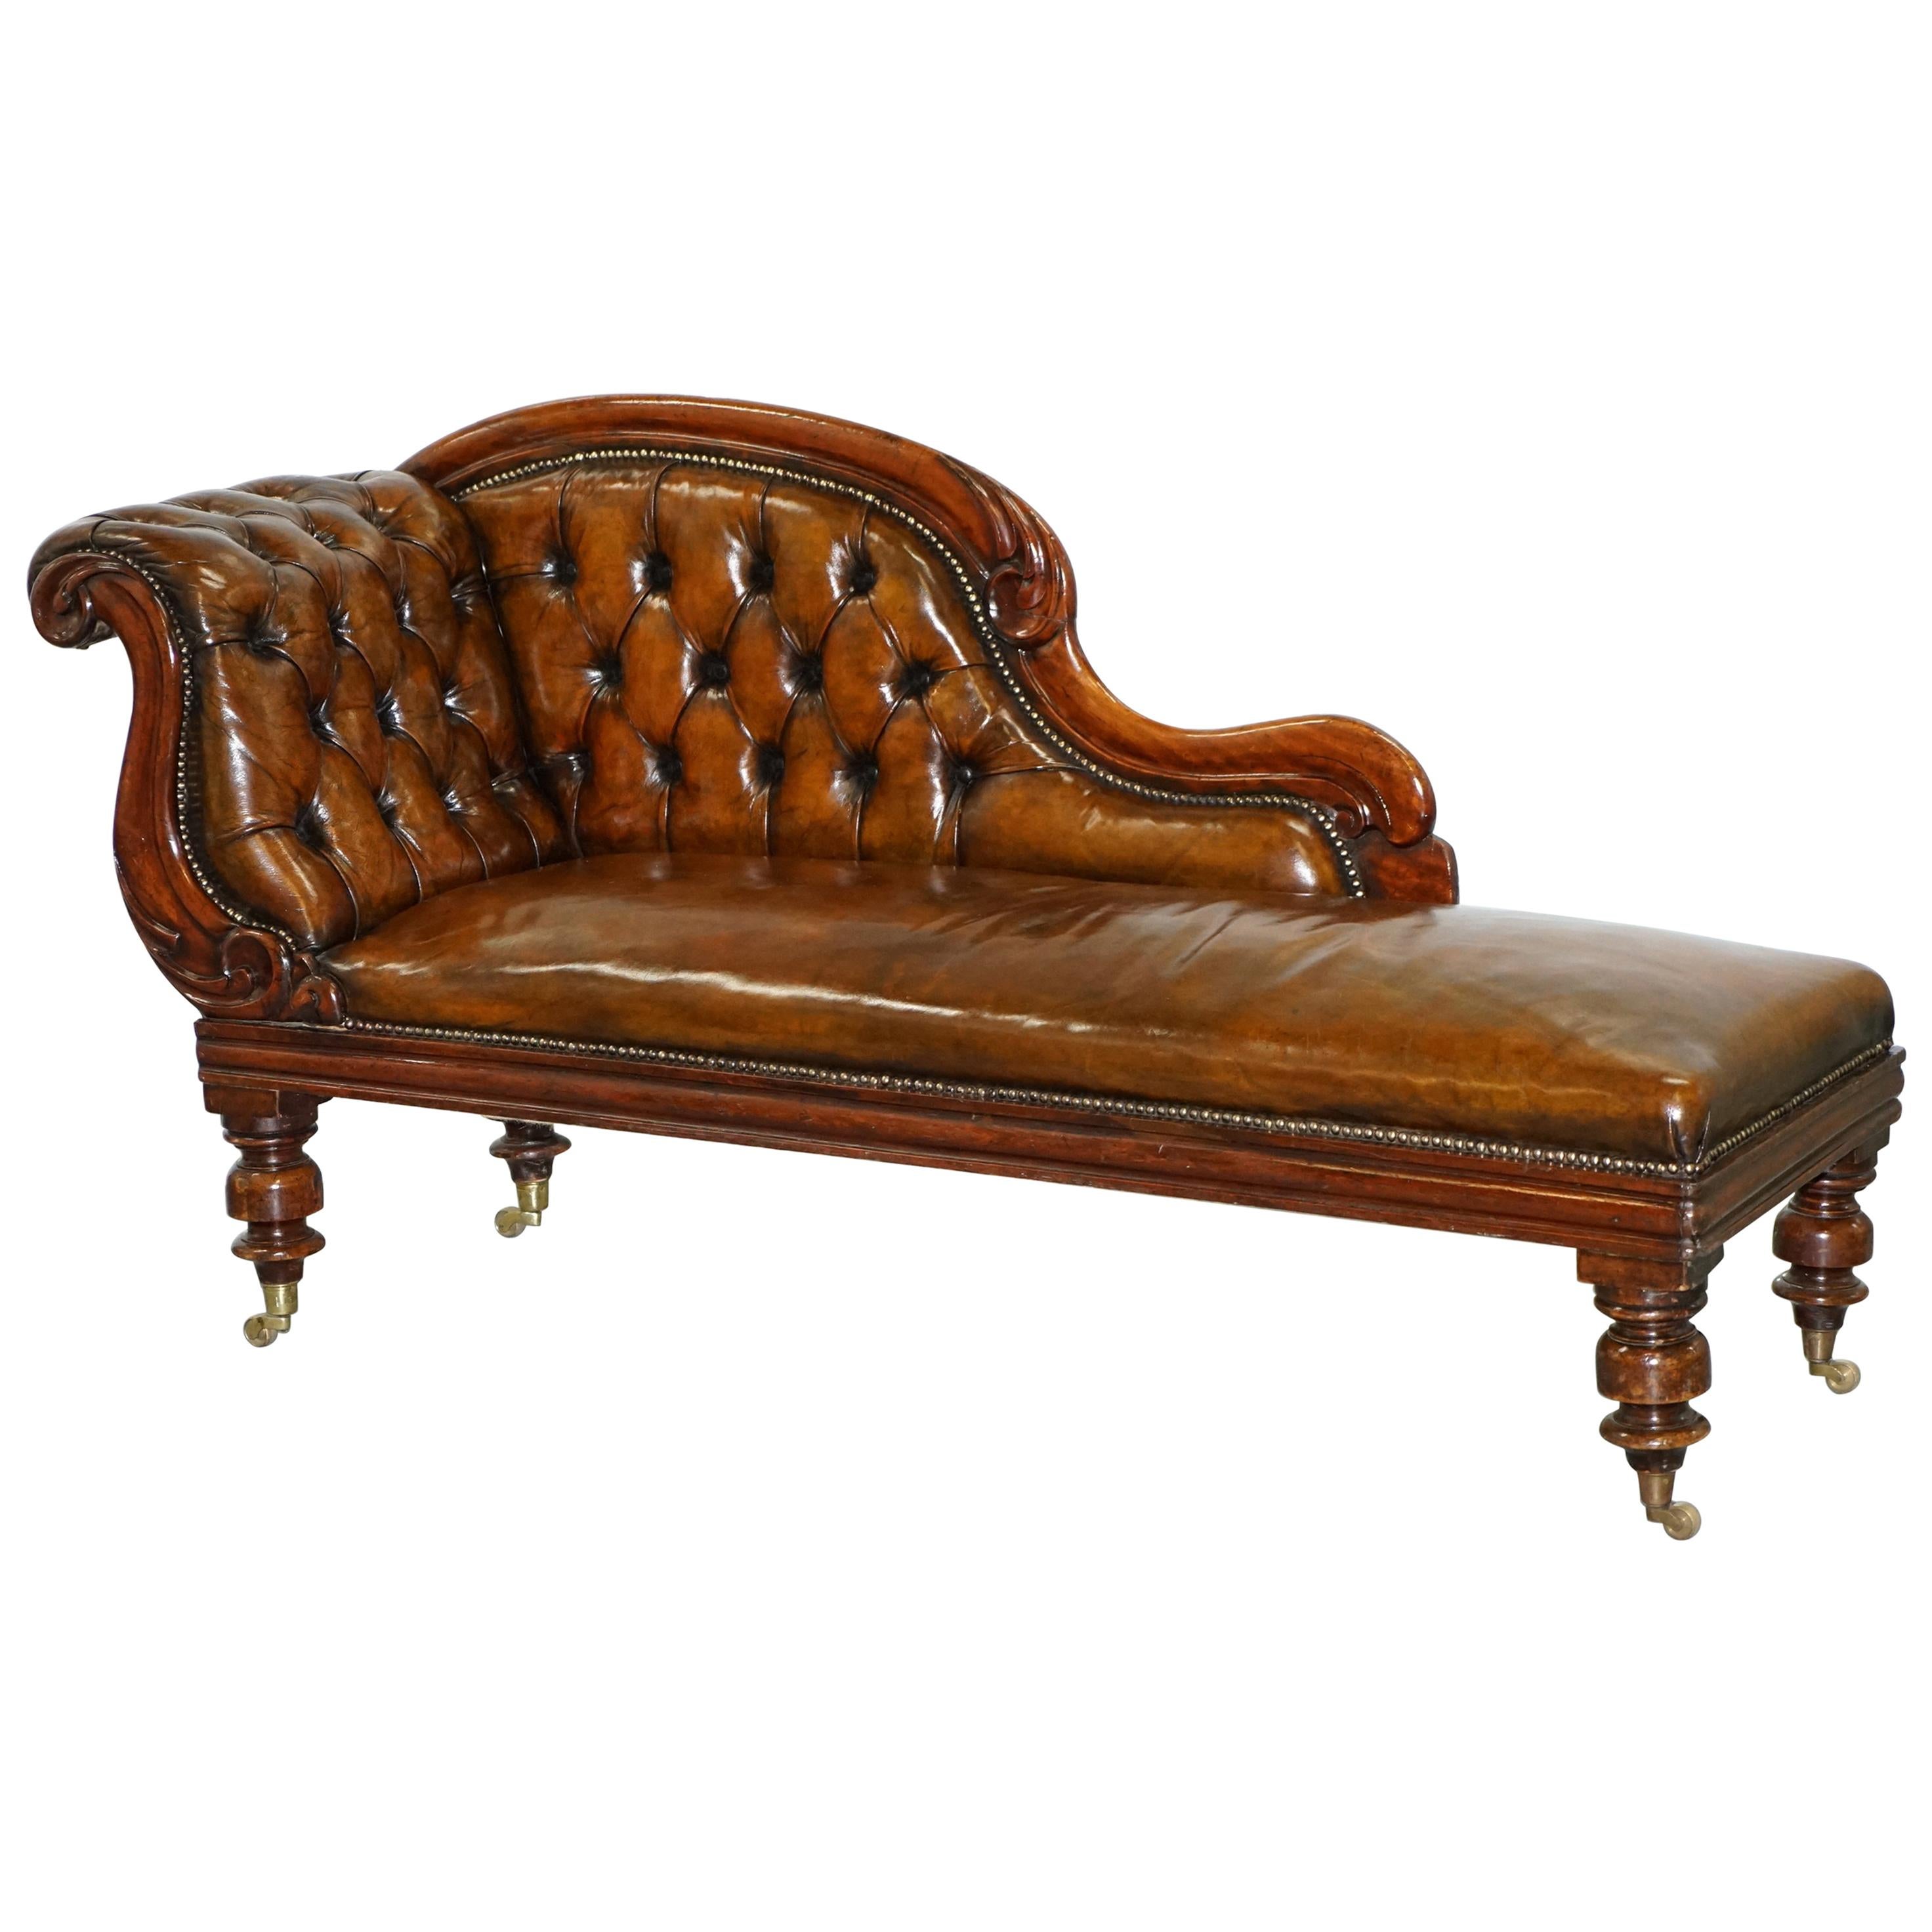 Stunning Restored Victorian Chesterfield Aged Brown Leather Chaise Longue Daybed